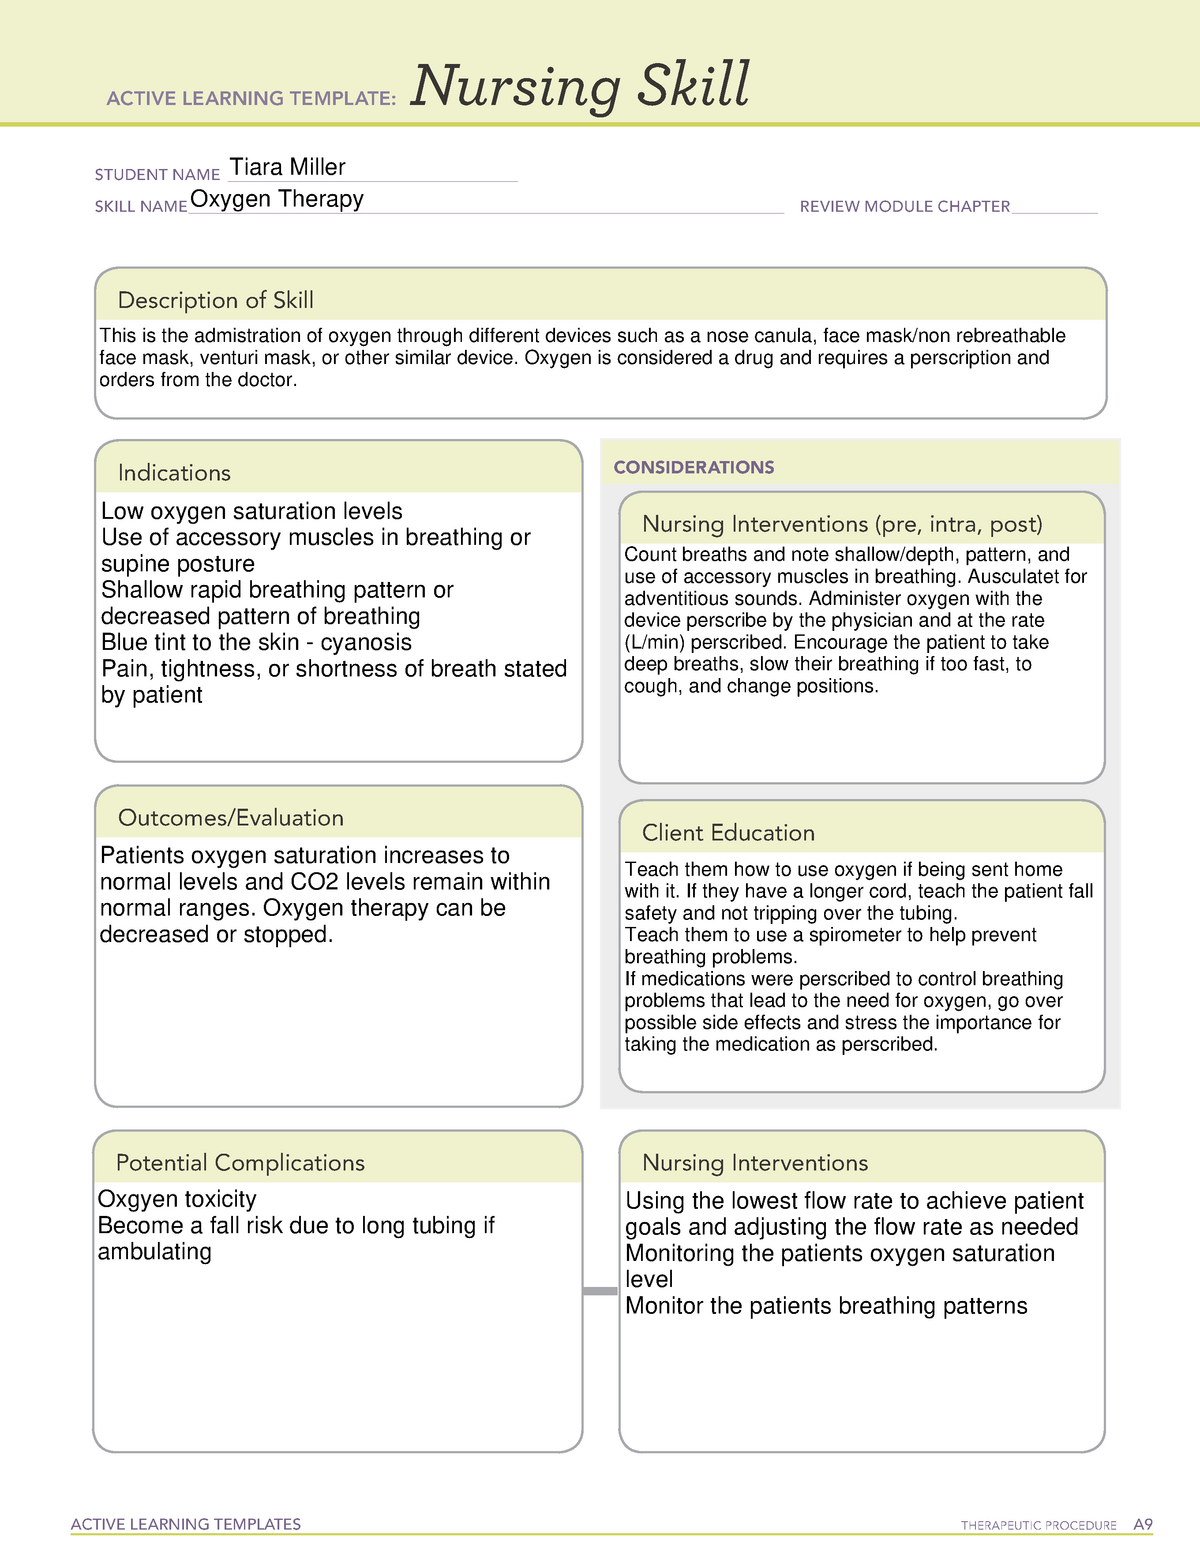 active-learning-templates-oxygen-therapy-active-learning-templates